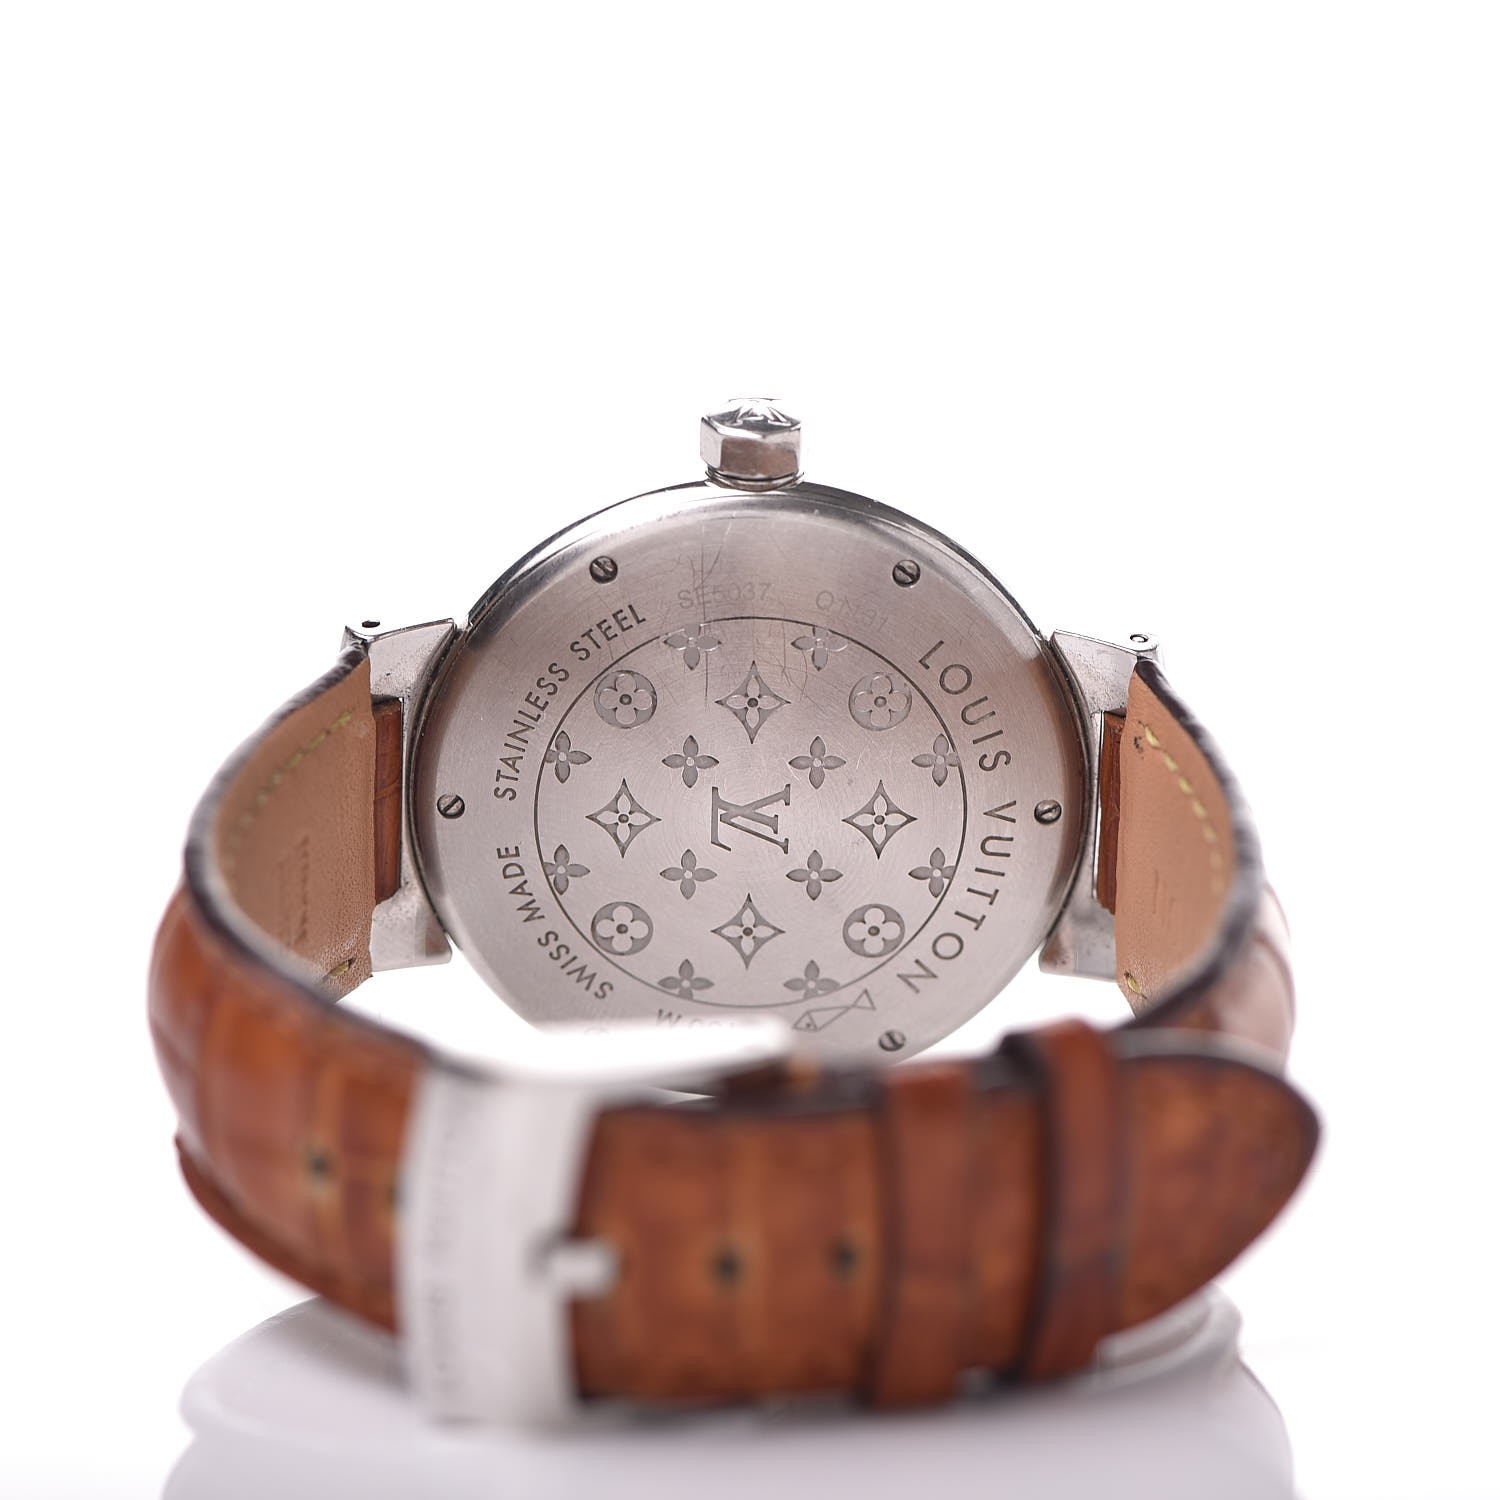 Louis Vuitton Tambour Automatic Chronograph Watch LV277 at 1stDibs